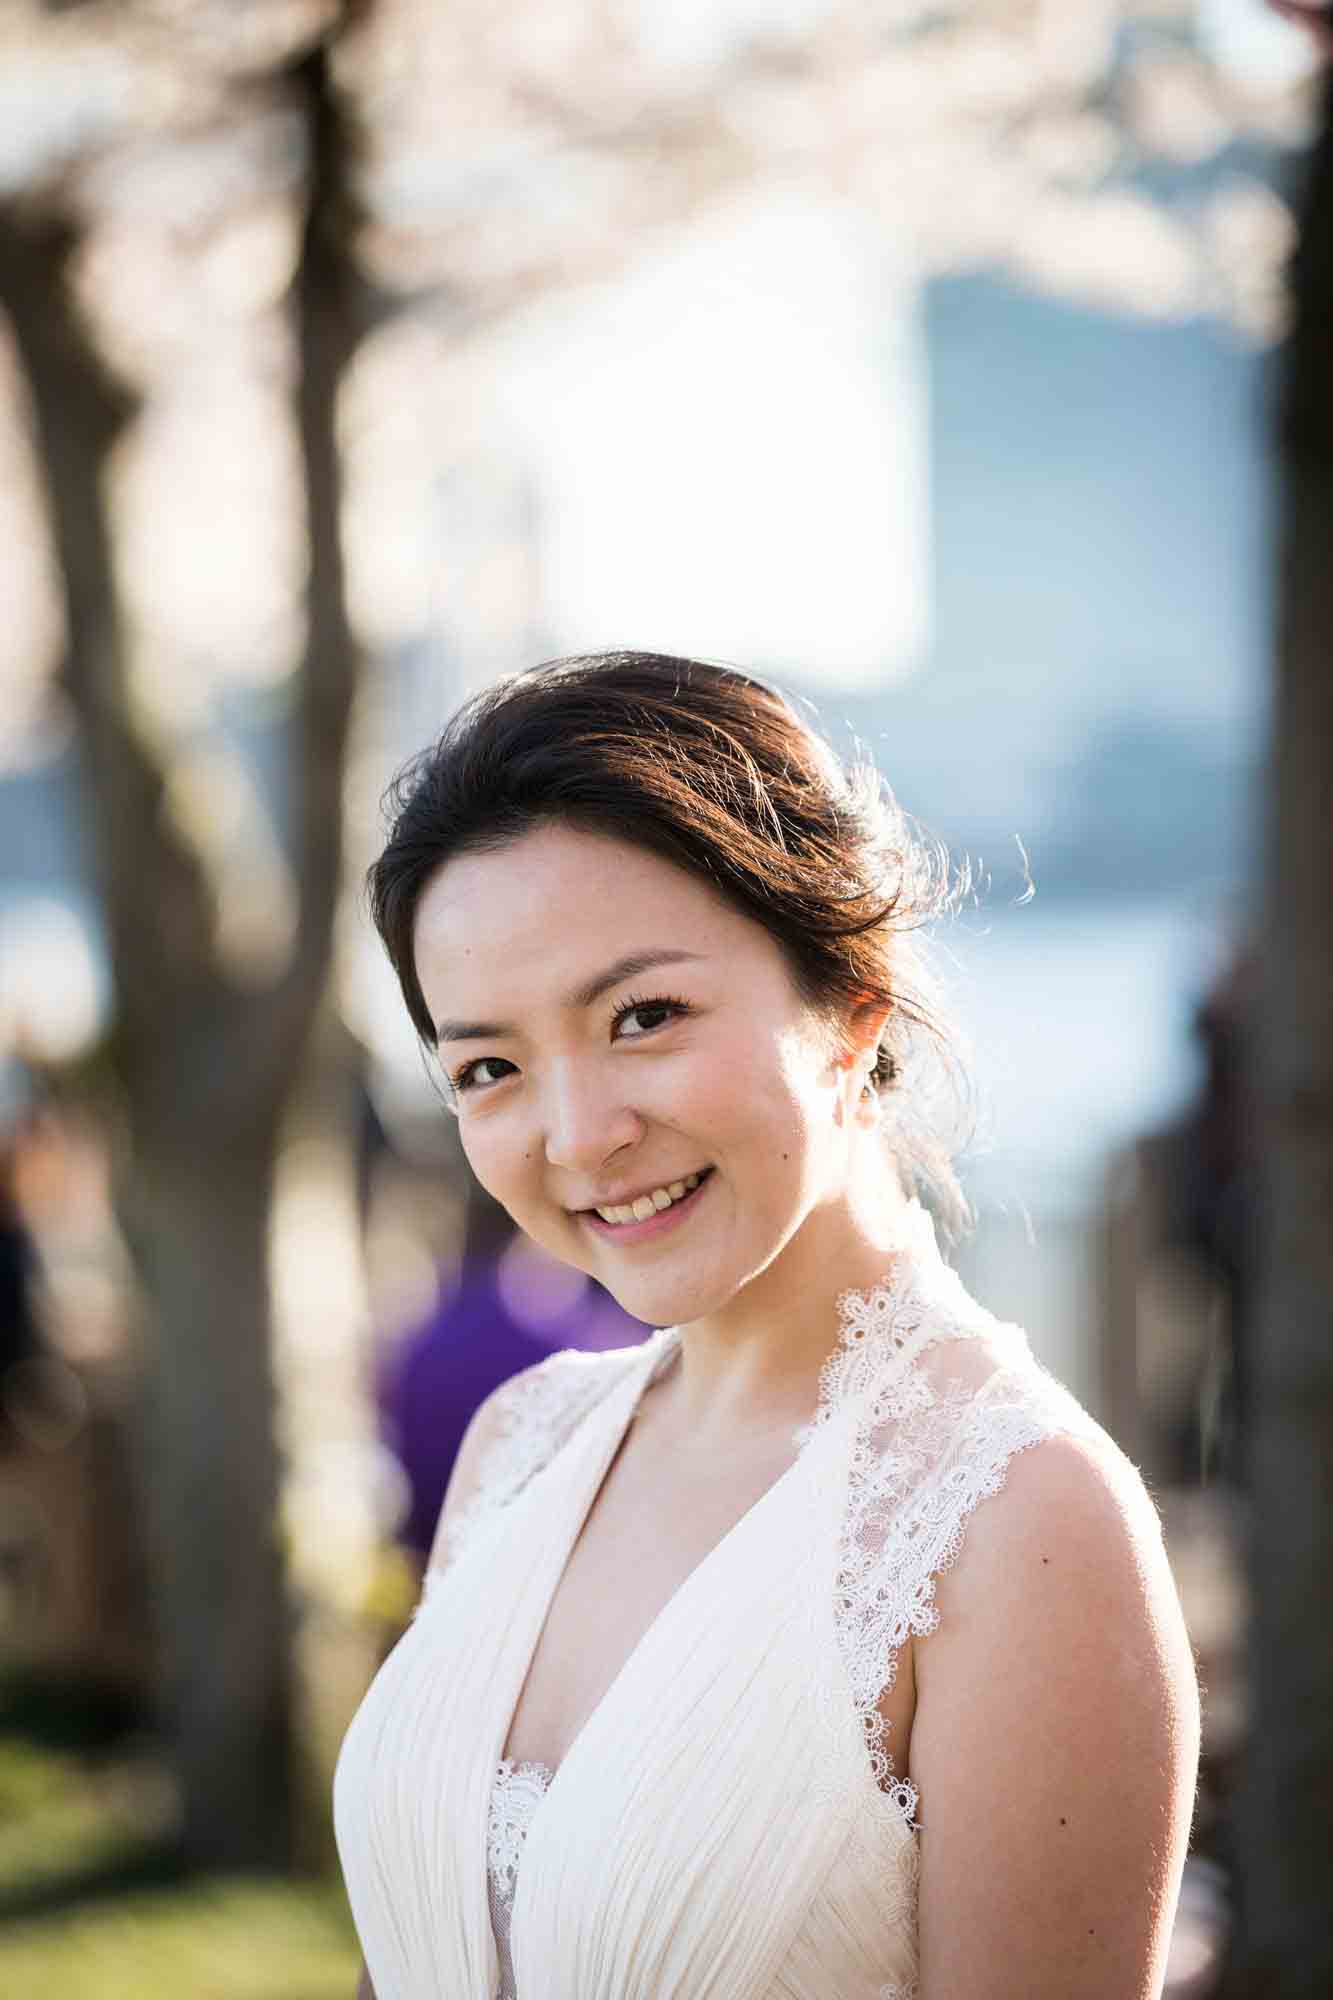 Woman wearing white sleeveless dress smiling into camera Couple walking under cherry blossom trees during a Roosevelt Island engagement photo shoot